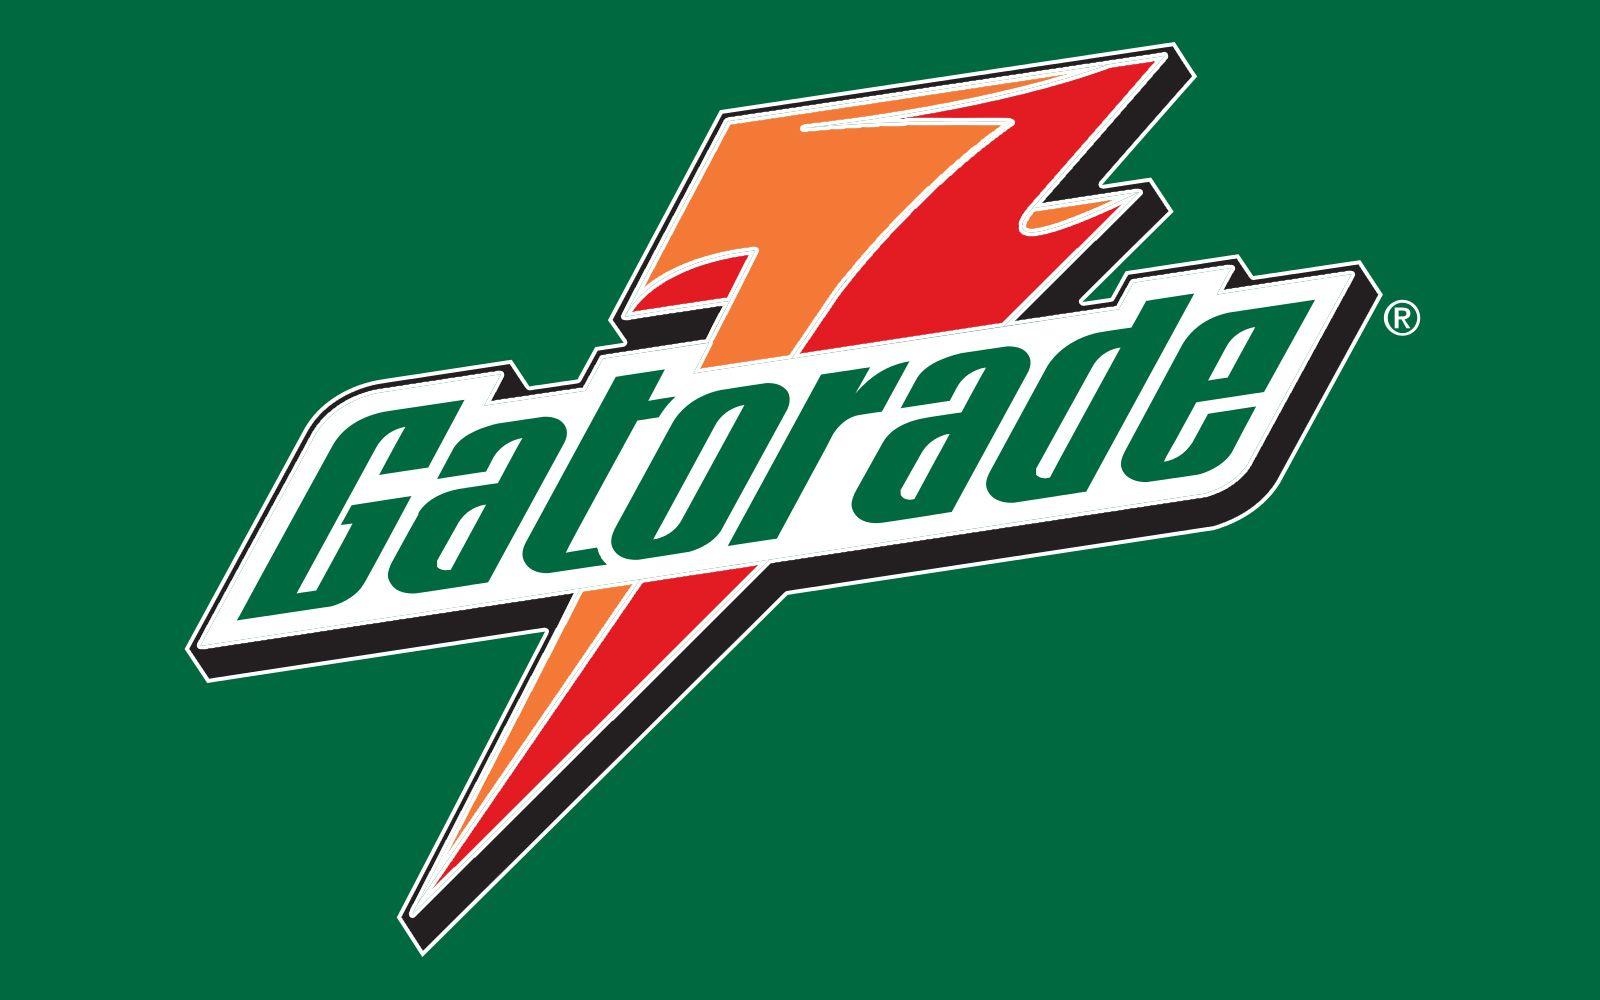 Old Gatorade Logo - Gatorade Logo, Gatorade Symbol, Meaning, History and Evolution